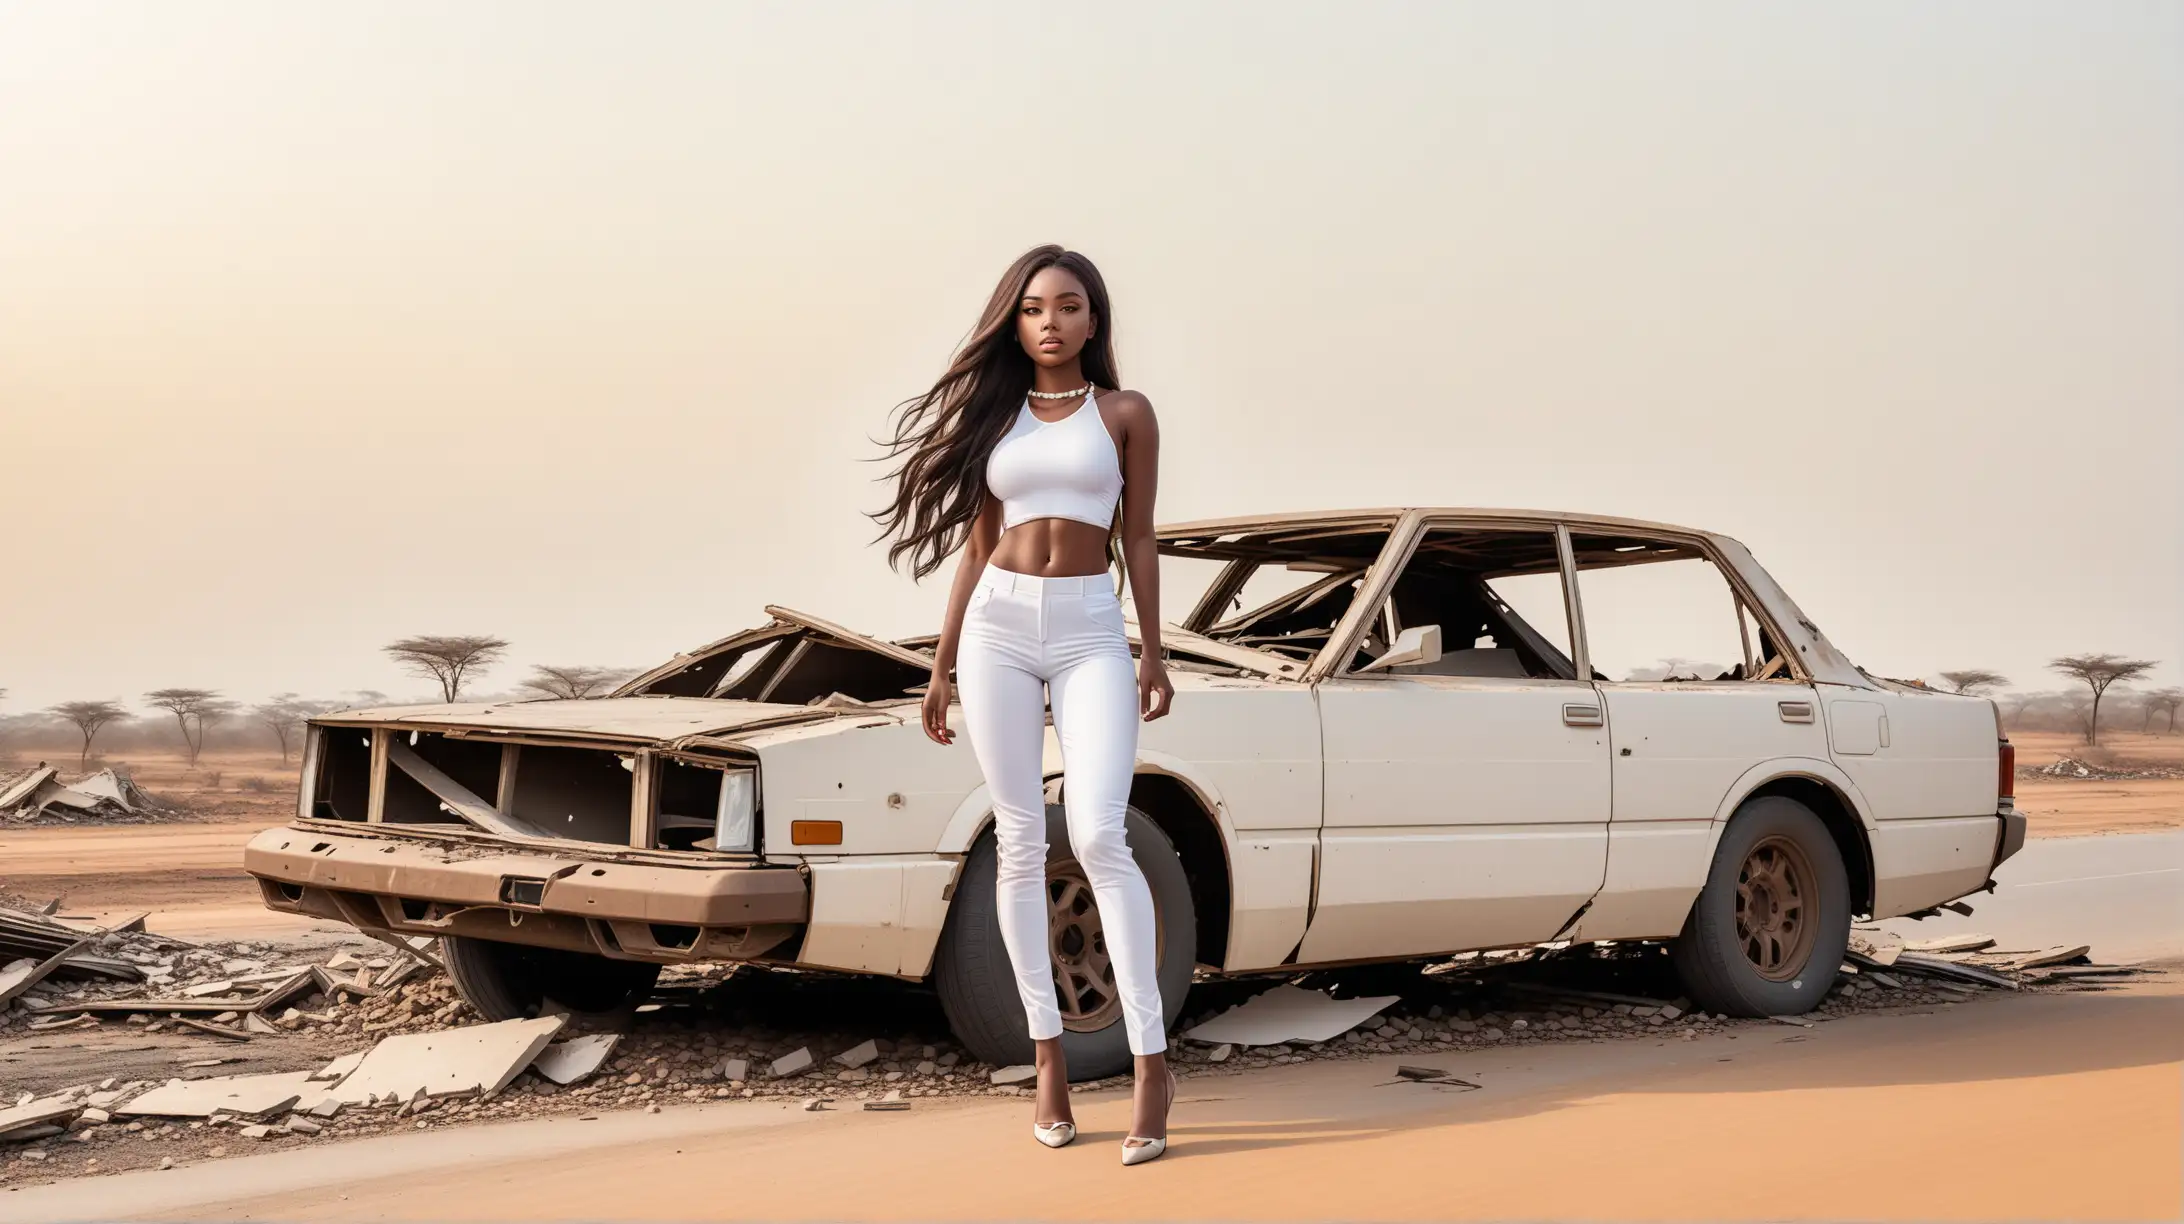 Full body of an African young woman dressed in a sexy outfit with white slack pants long hair standing on top of a demolished car in a deserted road